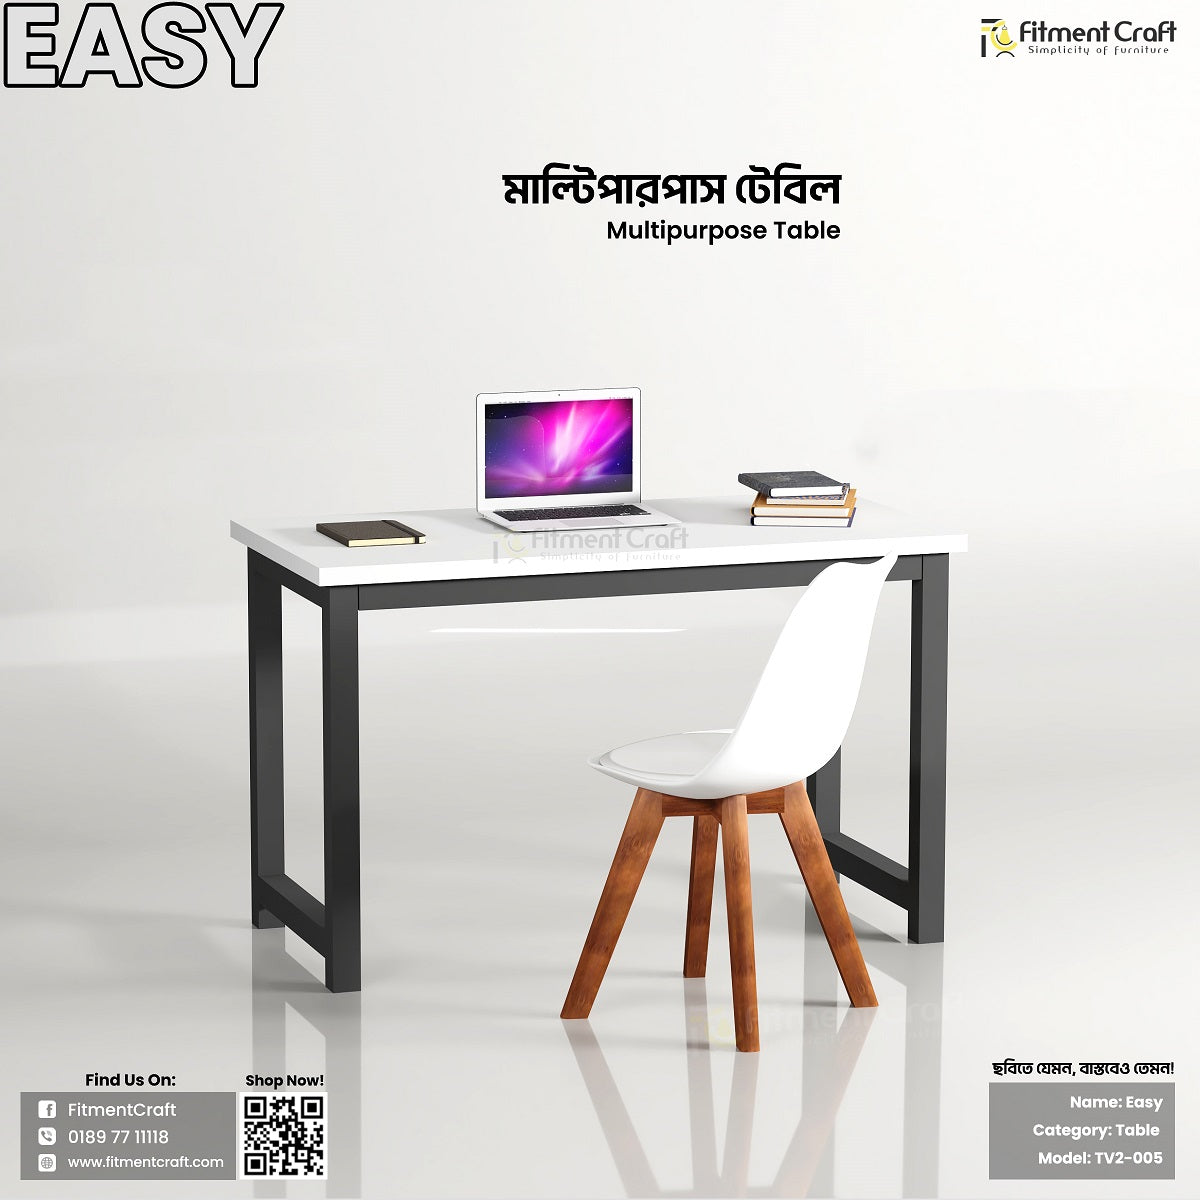 Easy Table | TV2-005